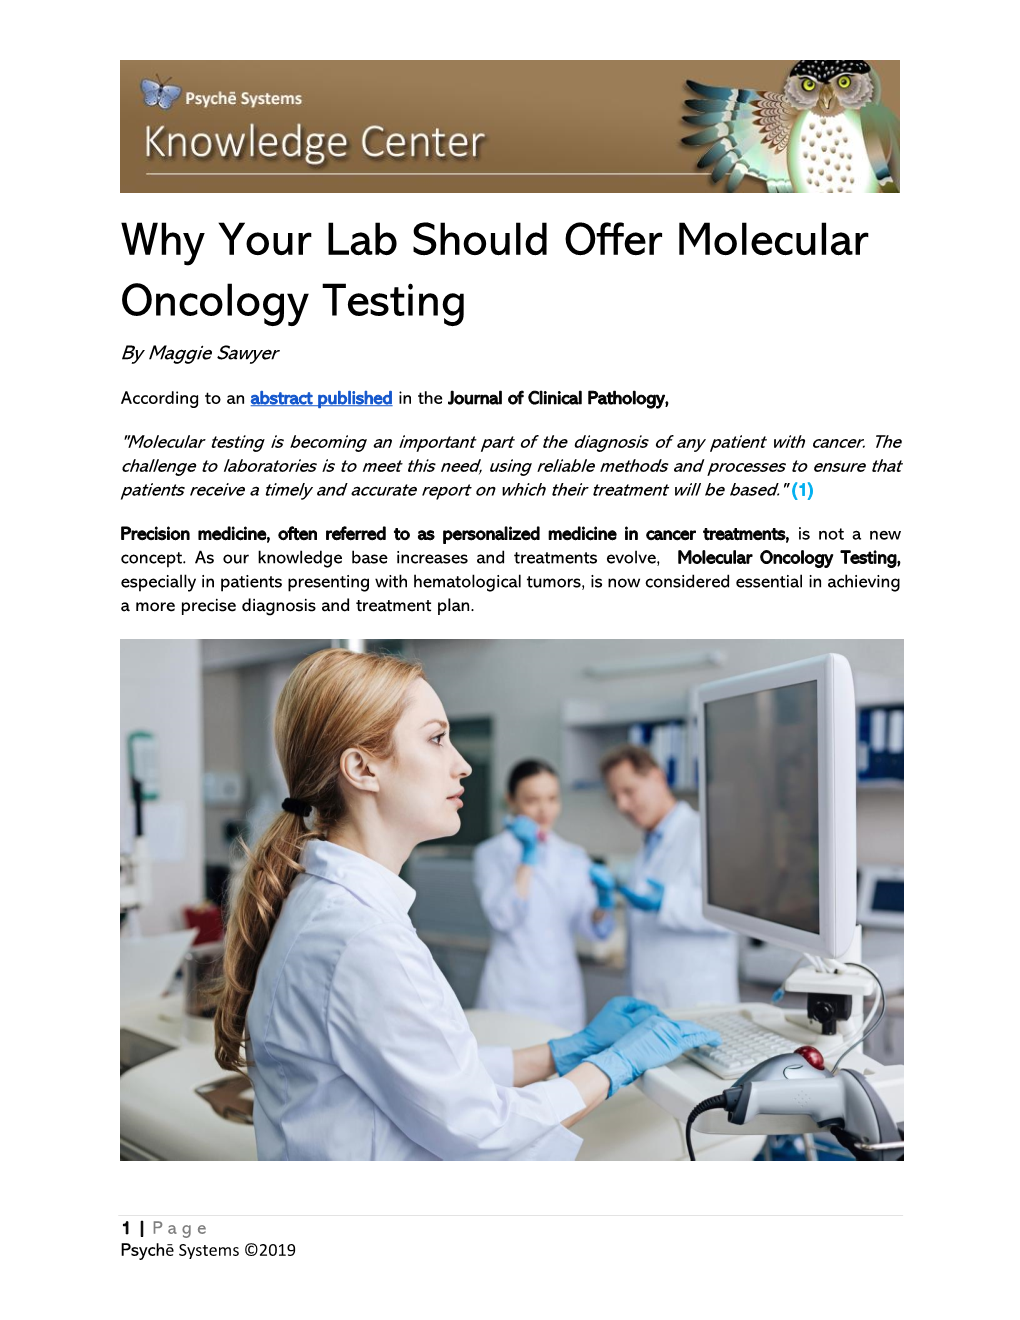 Why Your Lab Should Offer Molecular Oncology Testing by Maggie Sawyer